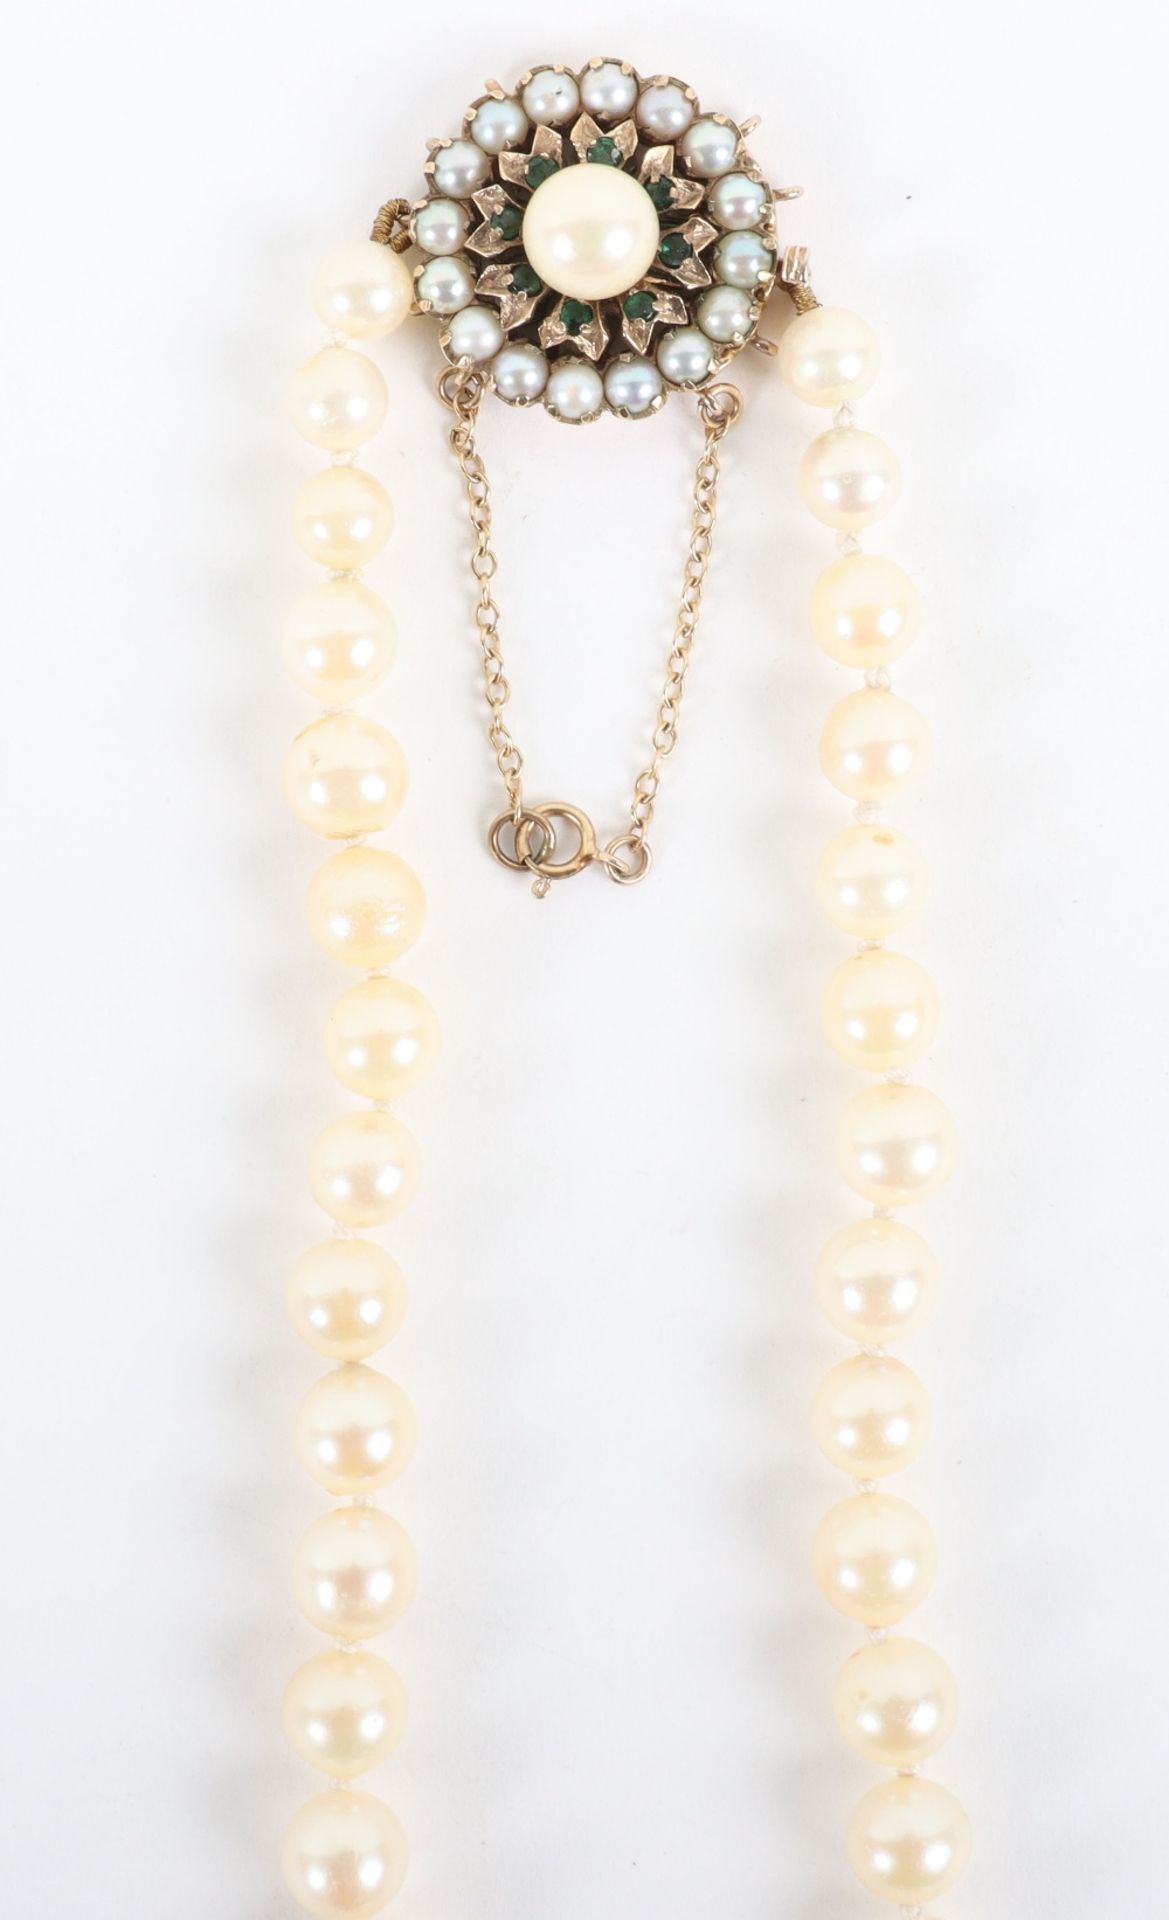 A 20th century 9ct gold and pearl necklace, London 1964 - Image 2 of 4